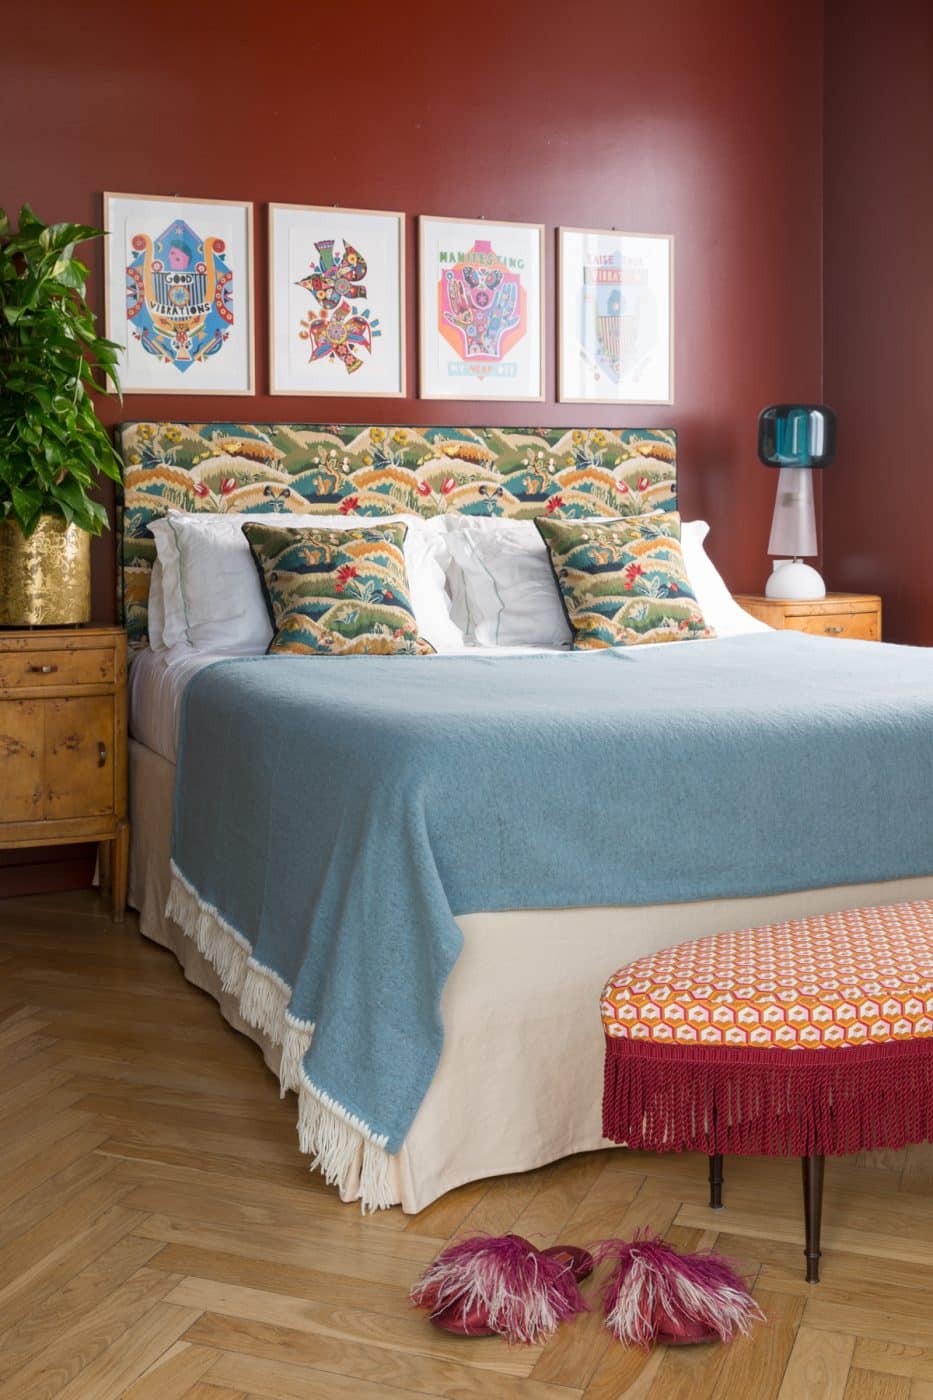 Martin's bedroom features a 1950s OVAL BENCH covered in her geometric Cubi print with a fringe border.